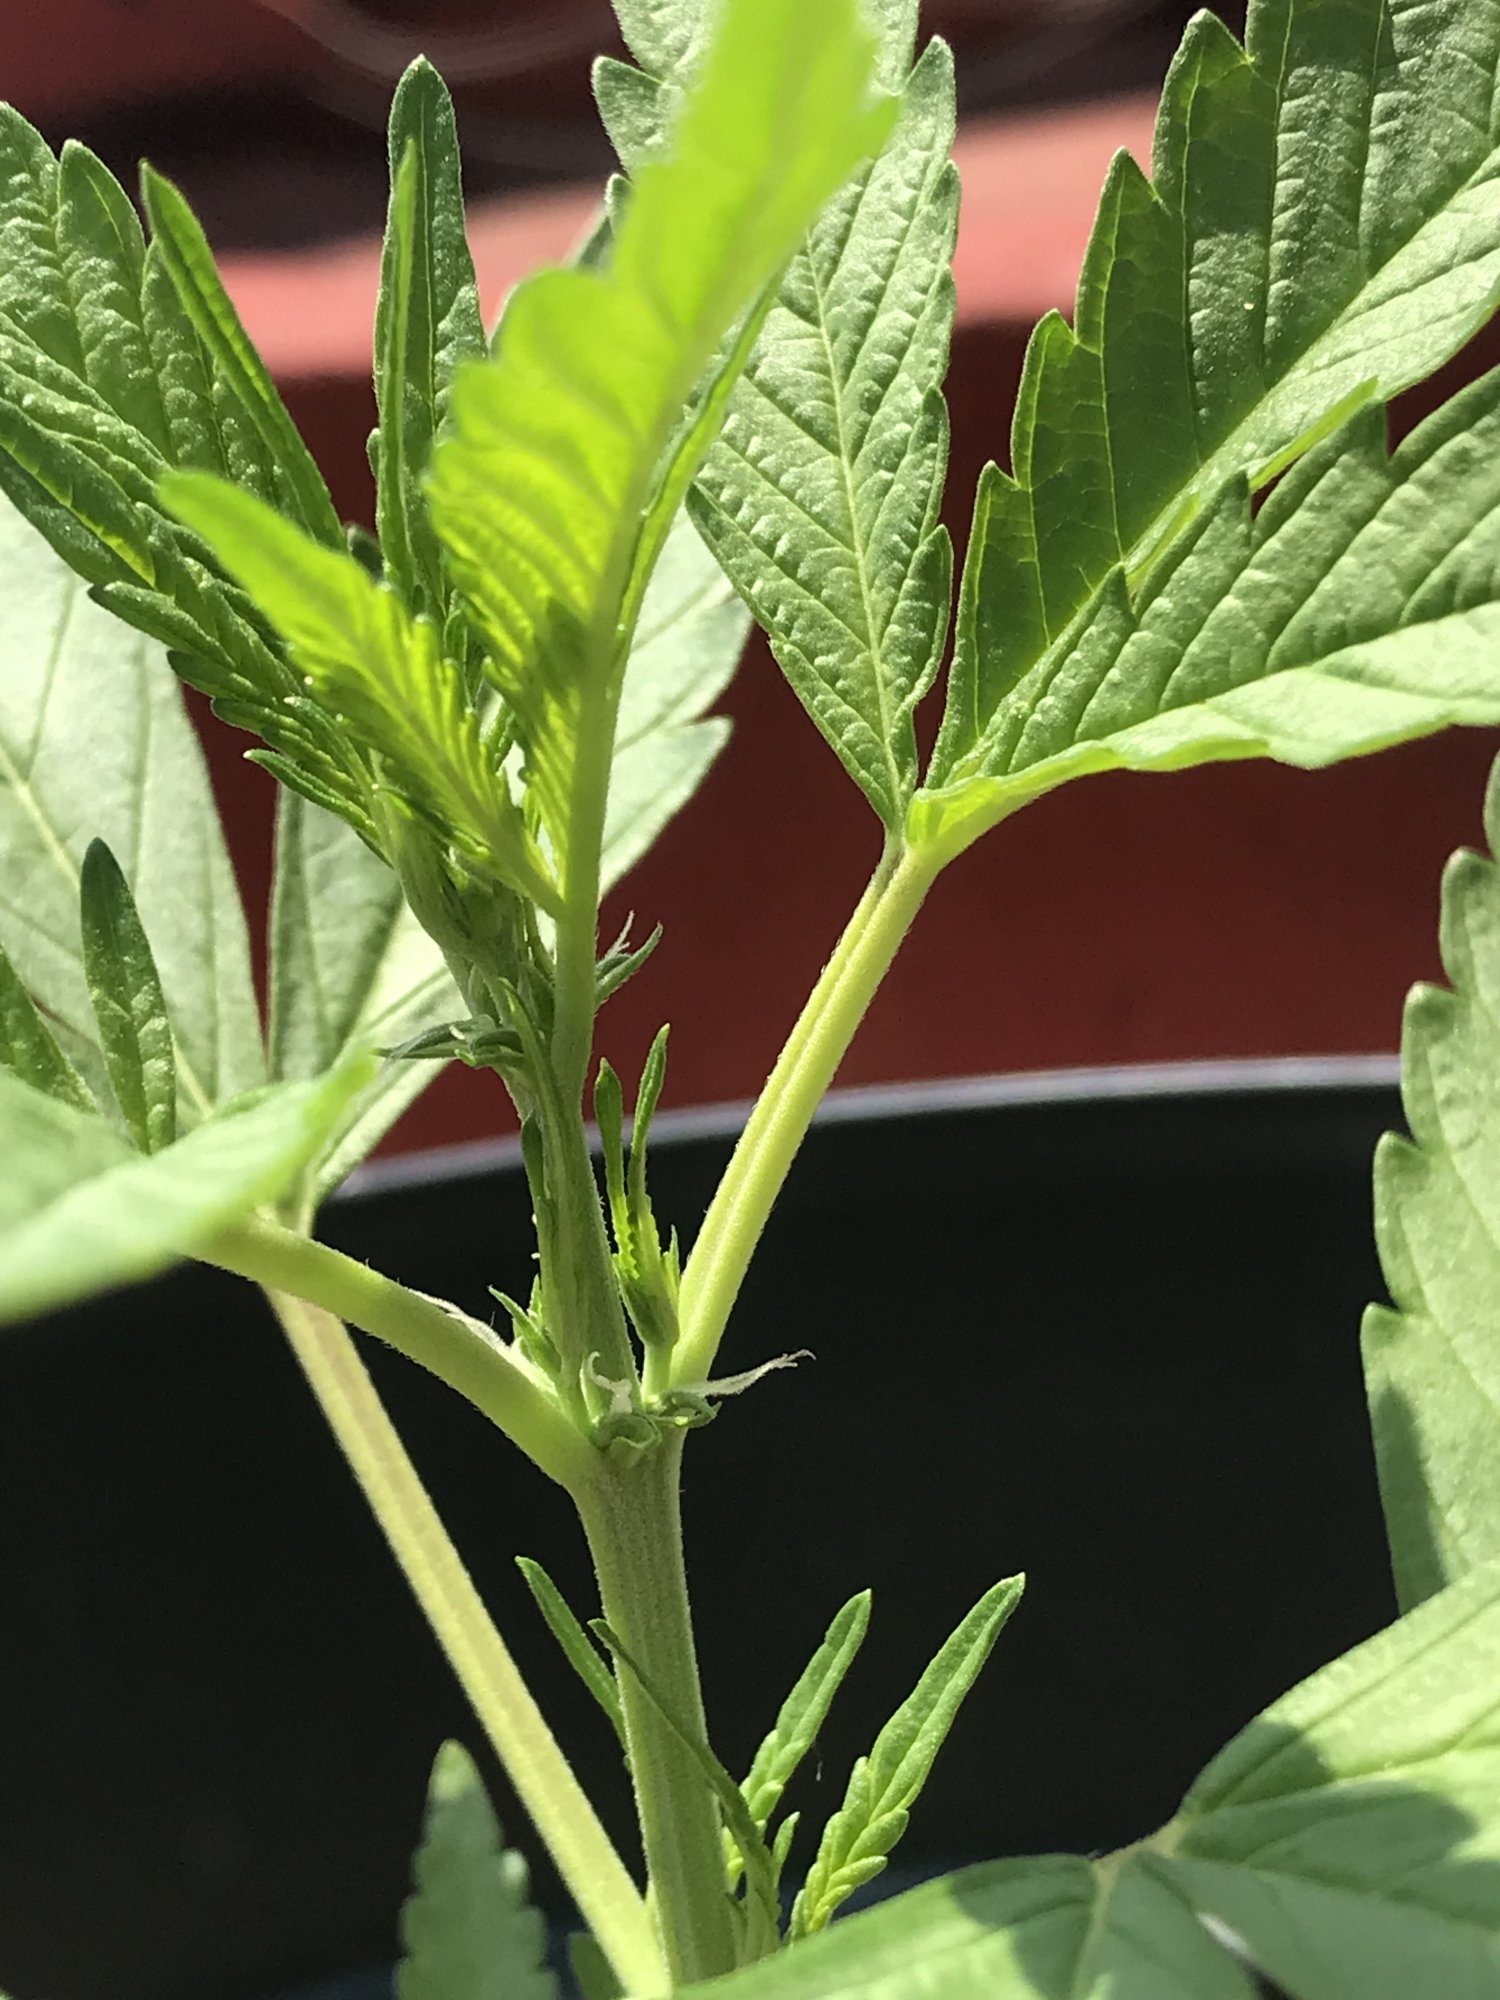 First time grower here outdoor plant preflowering in veg questions about feedingwatering 3